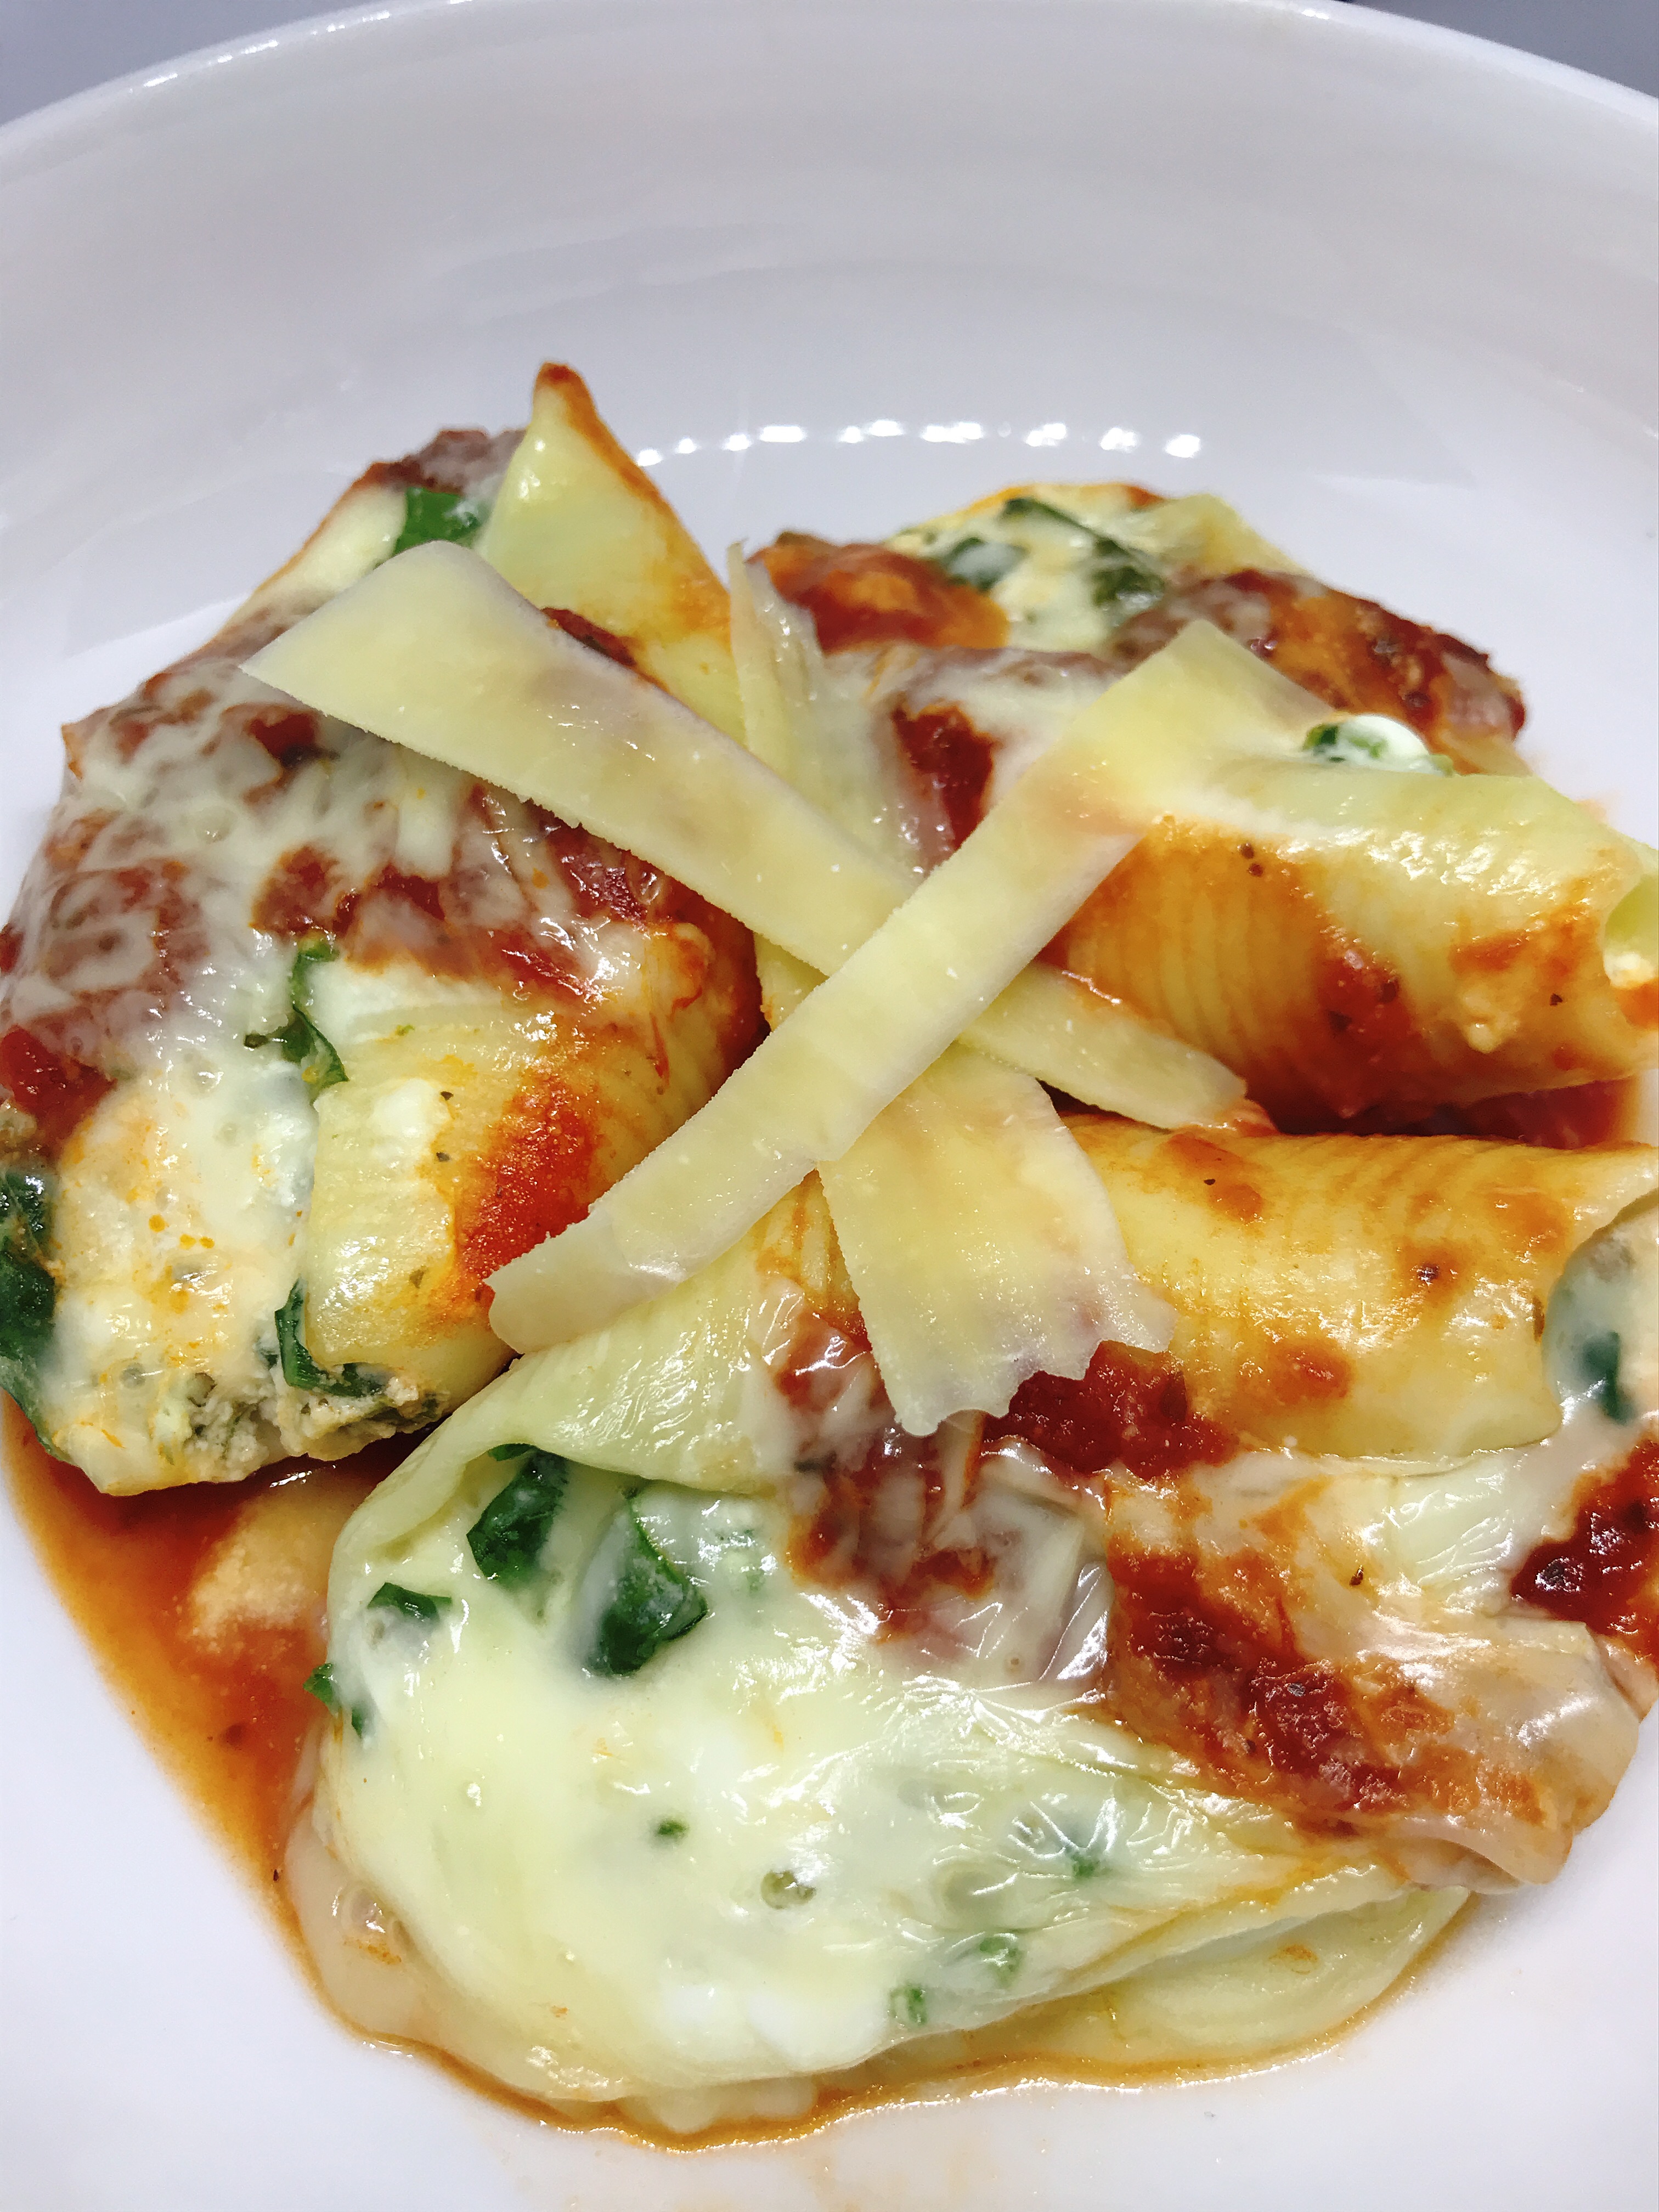 Stuffed Shells with Spinach, Ricotta, and Cottage Cheese